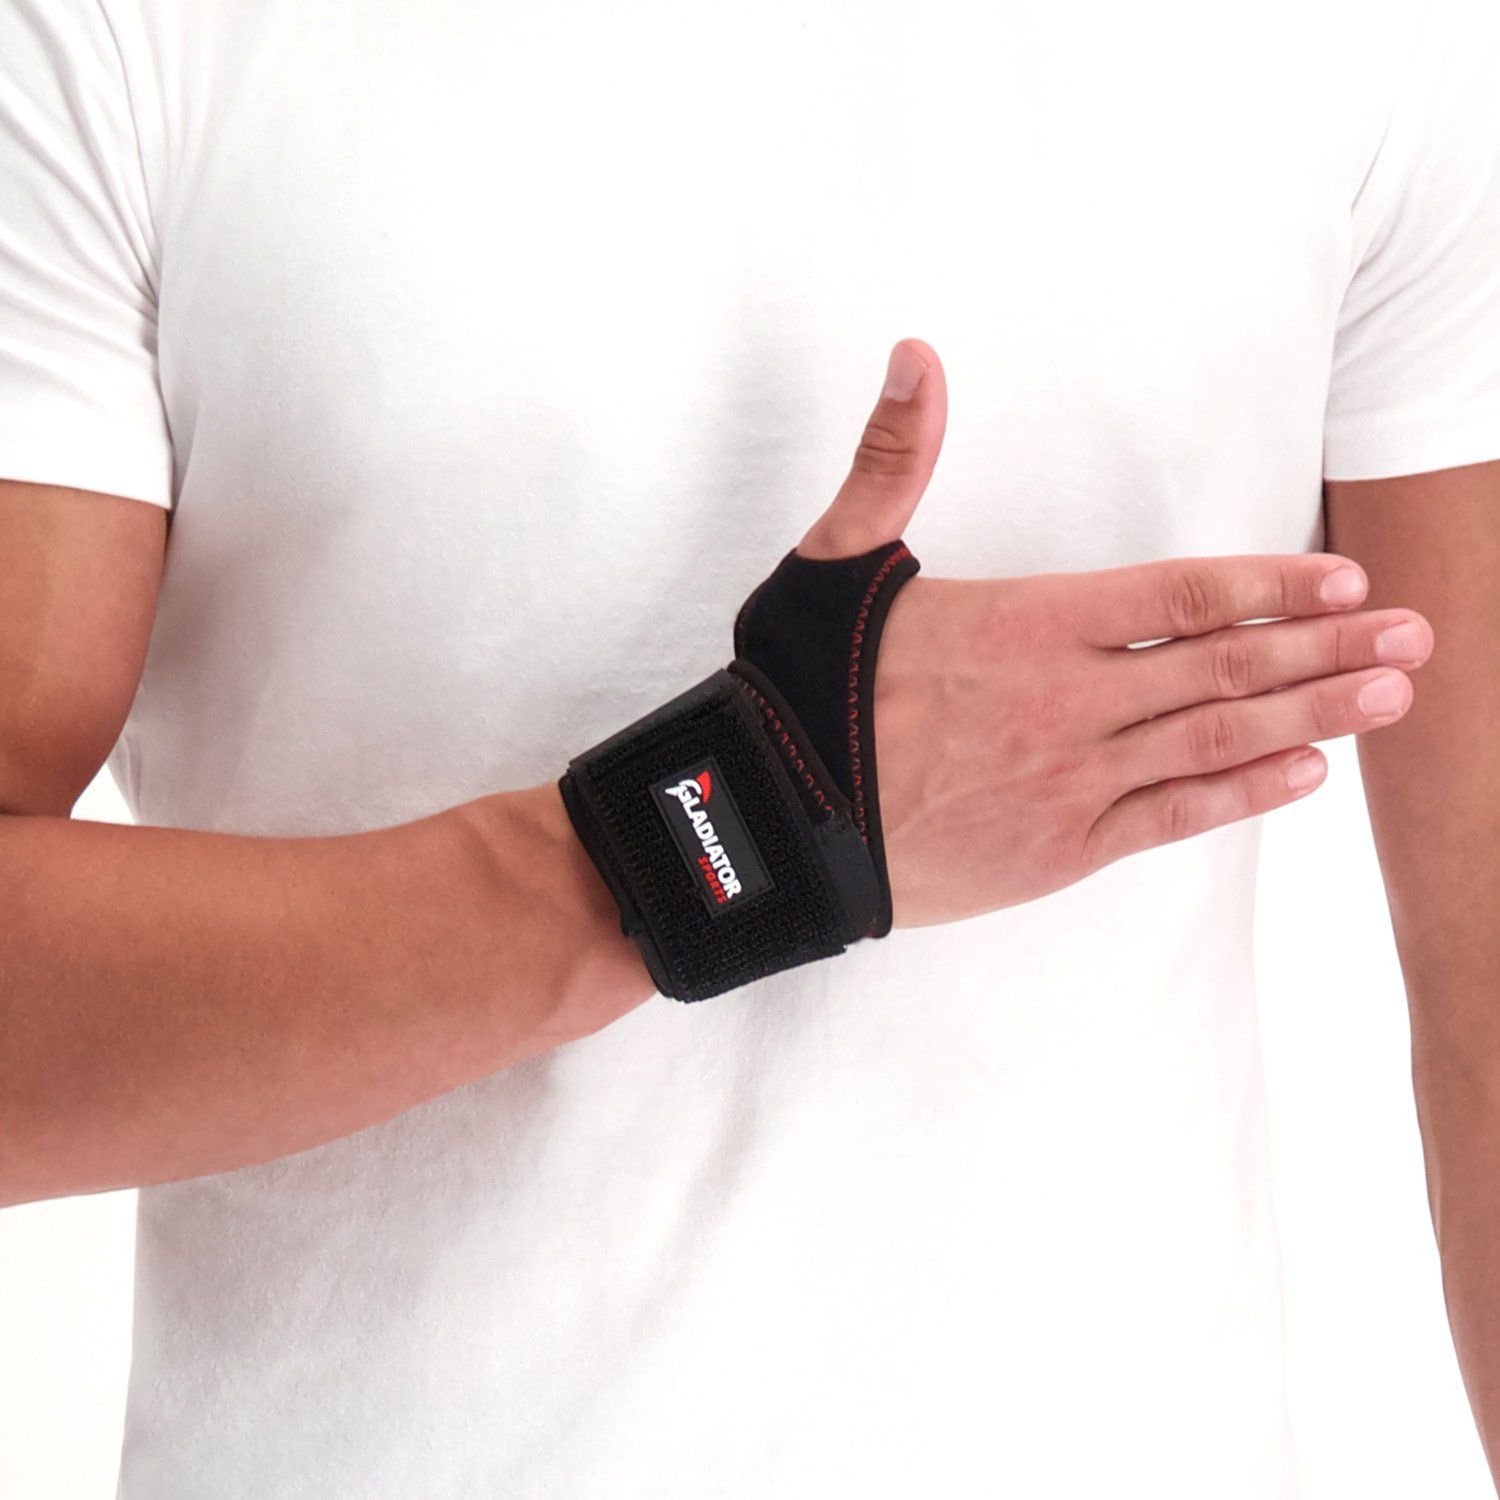 gladiator sports wrist support with thumb opening wrapped around wrist